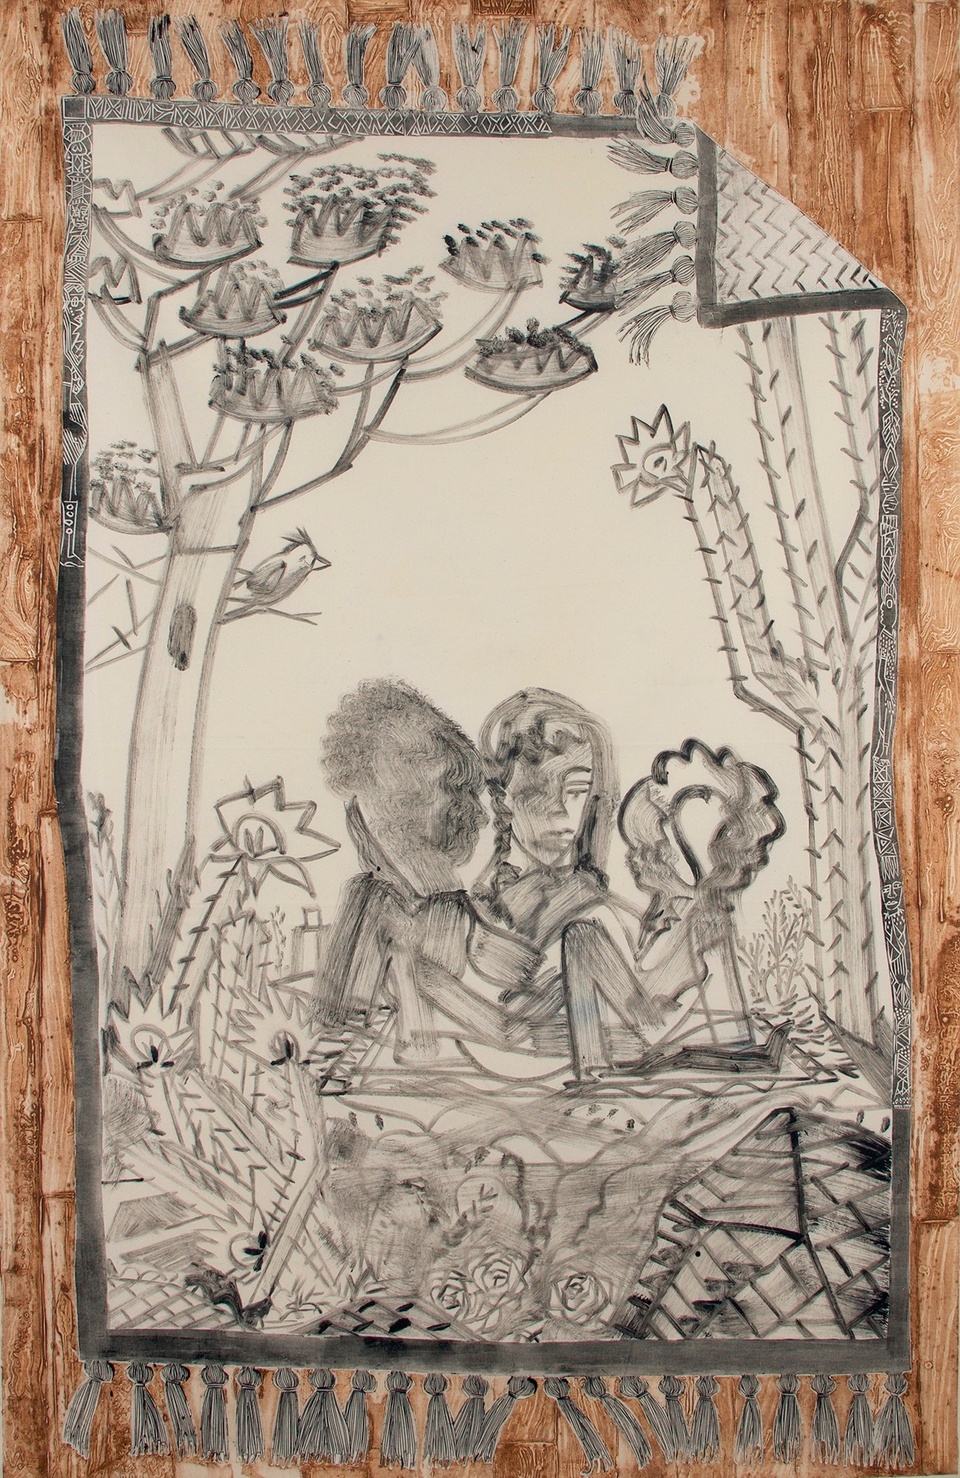 Image of a black and white tapestry of figures sitting in a landscape framed by cactus and trees